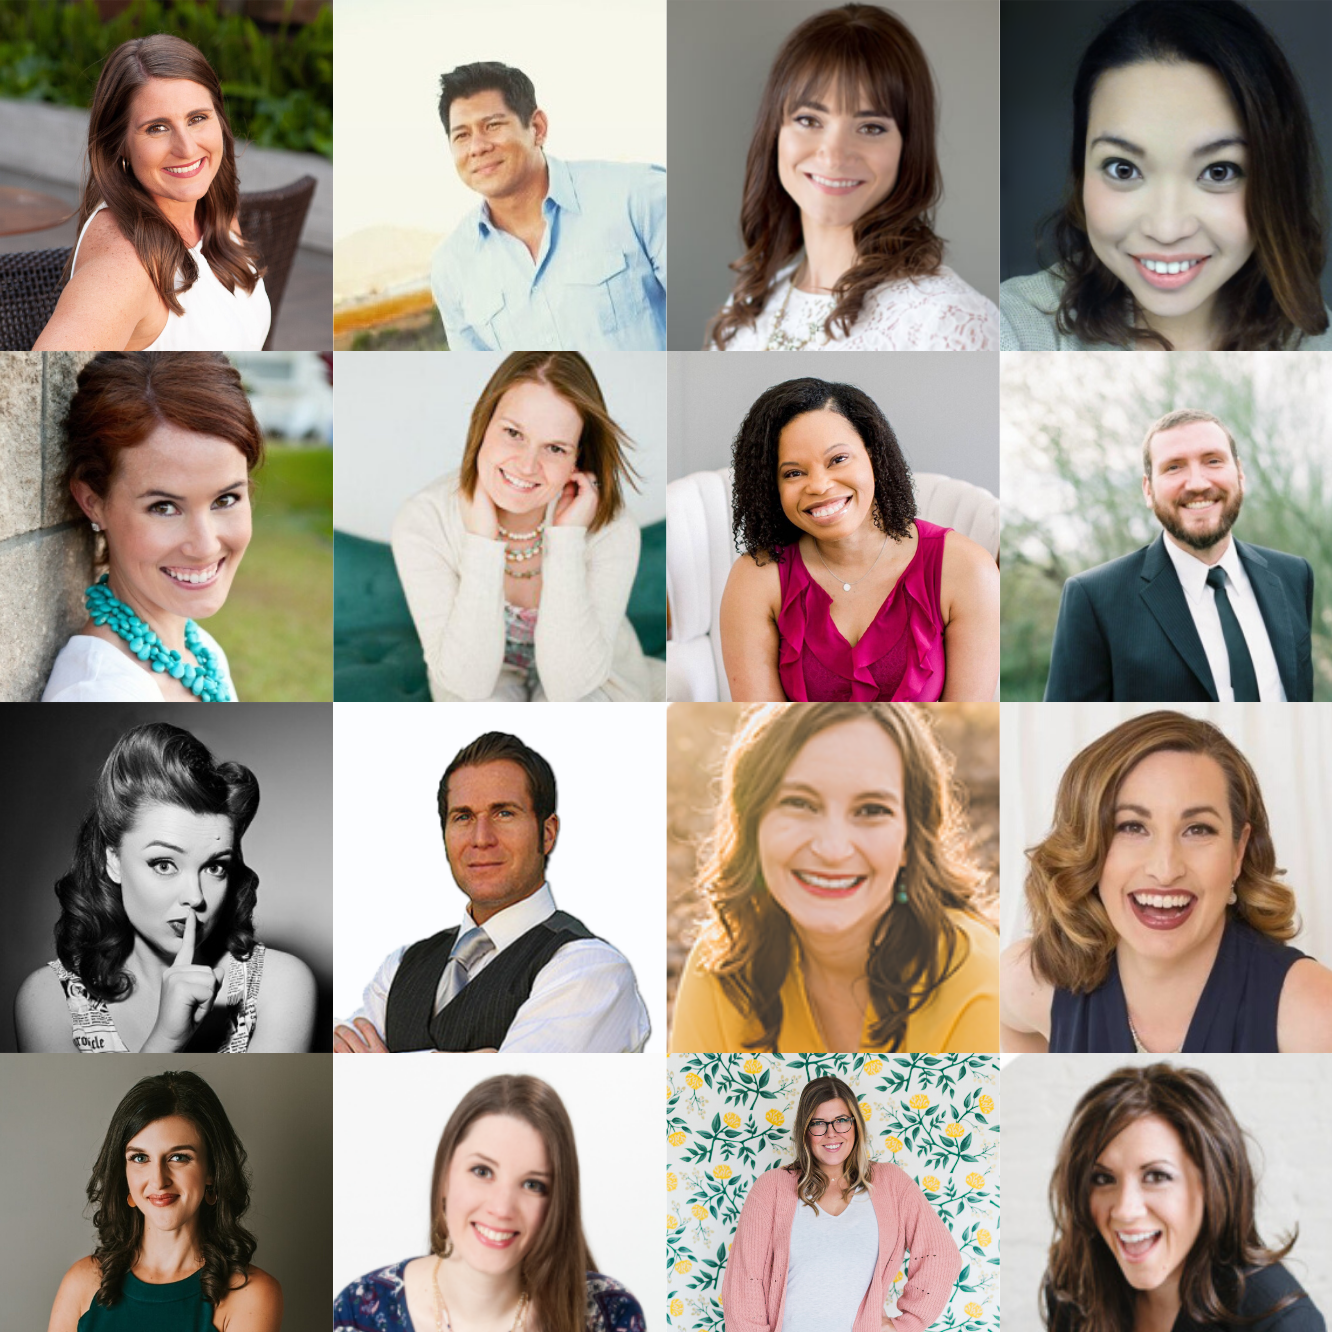 Over 20 Entrepreneurs Reveal Their Most Impactful Marketing Strategies for Growing a Profitable Online Business